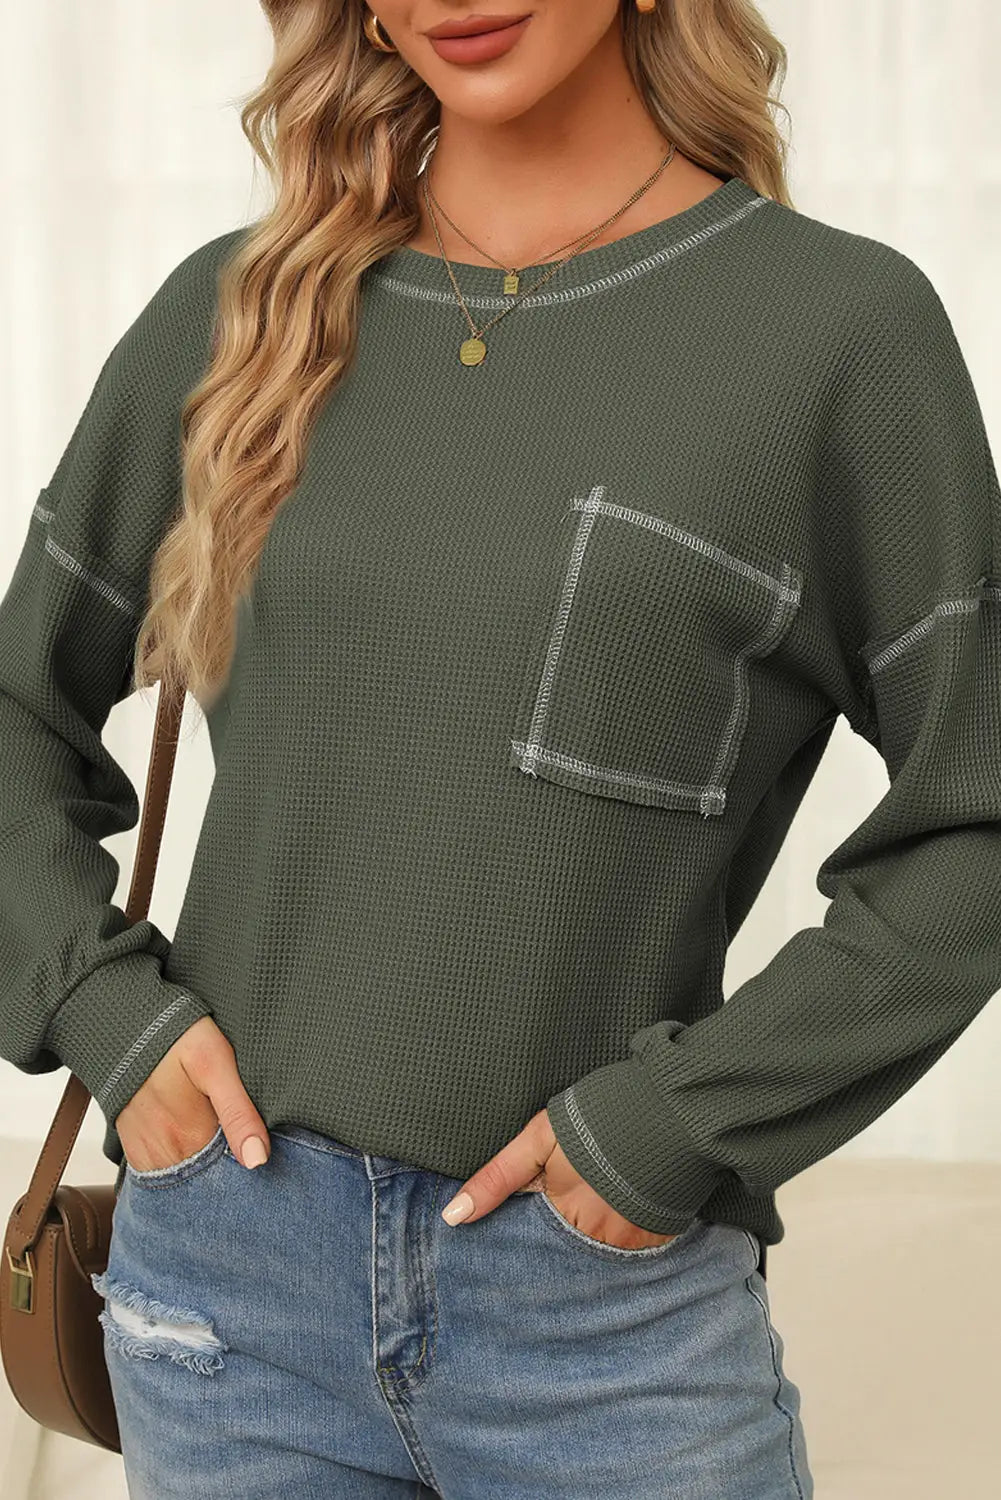 Mist Green Contrast Exposed Stitching Waffle Knit Blouse-5